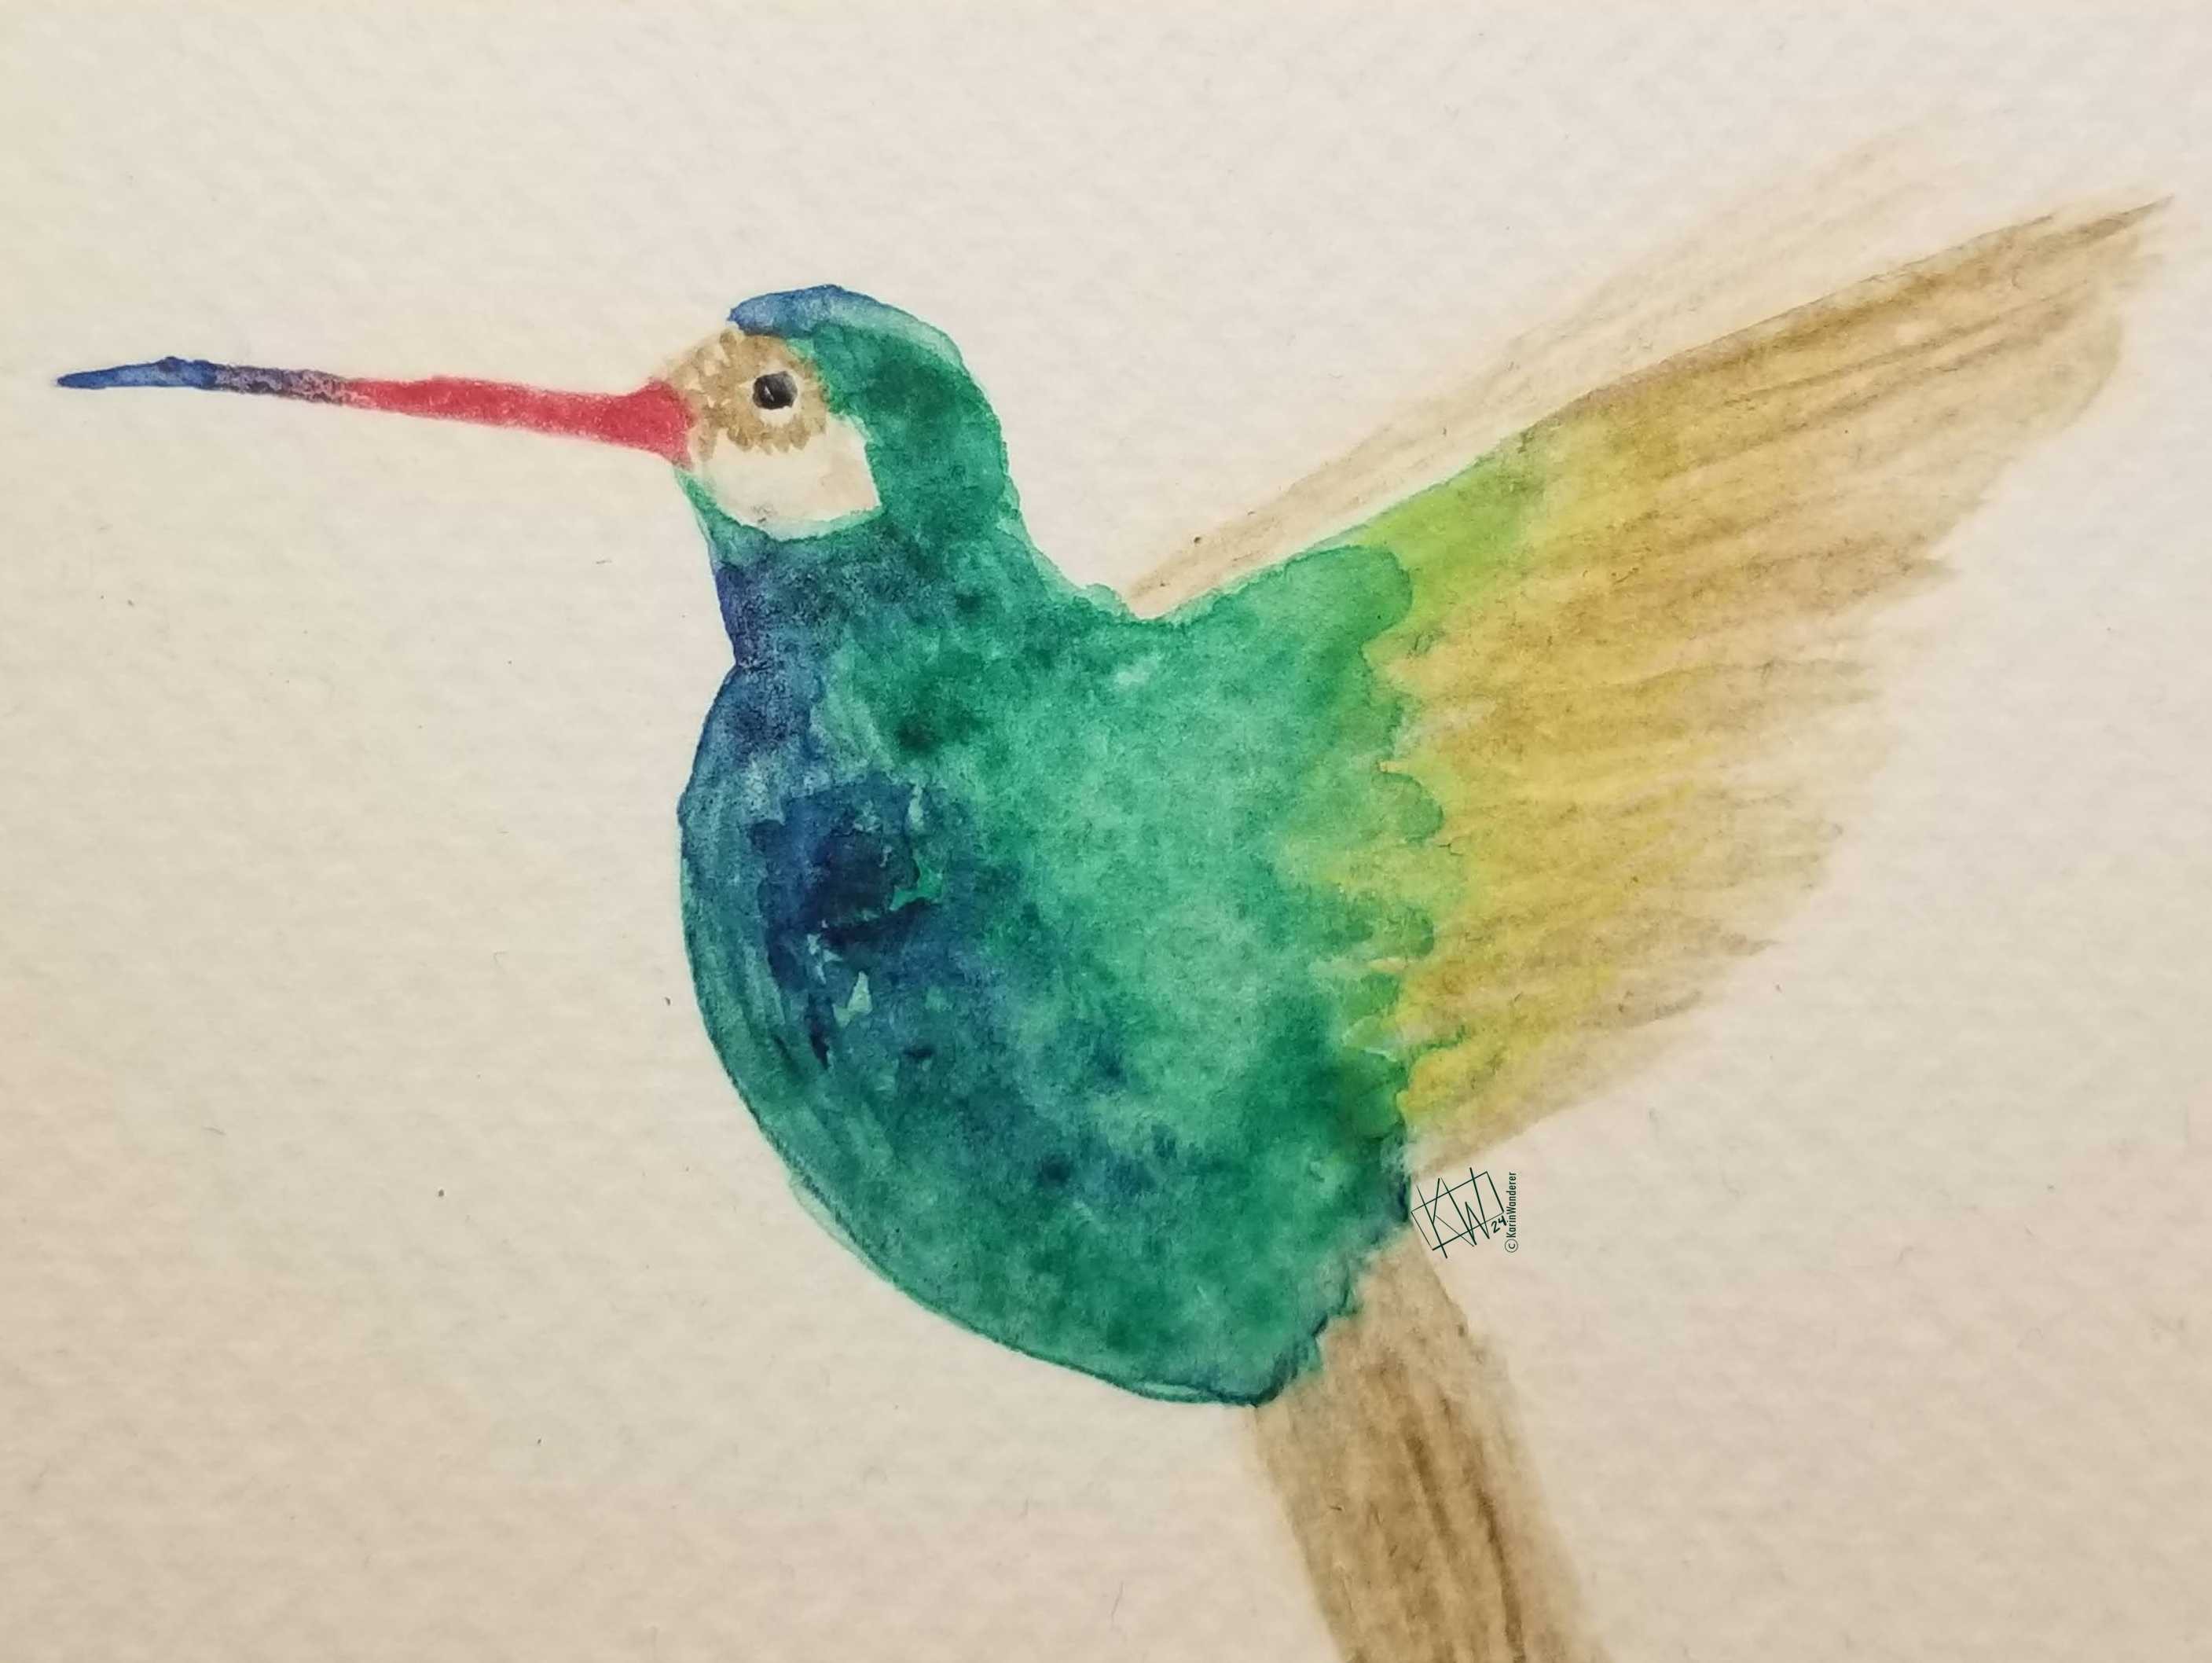 Watercolor hummingbird with green & blue body & beige wing/tail feathers.